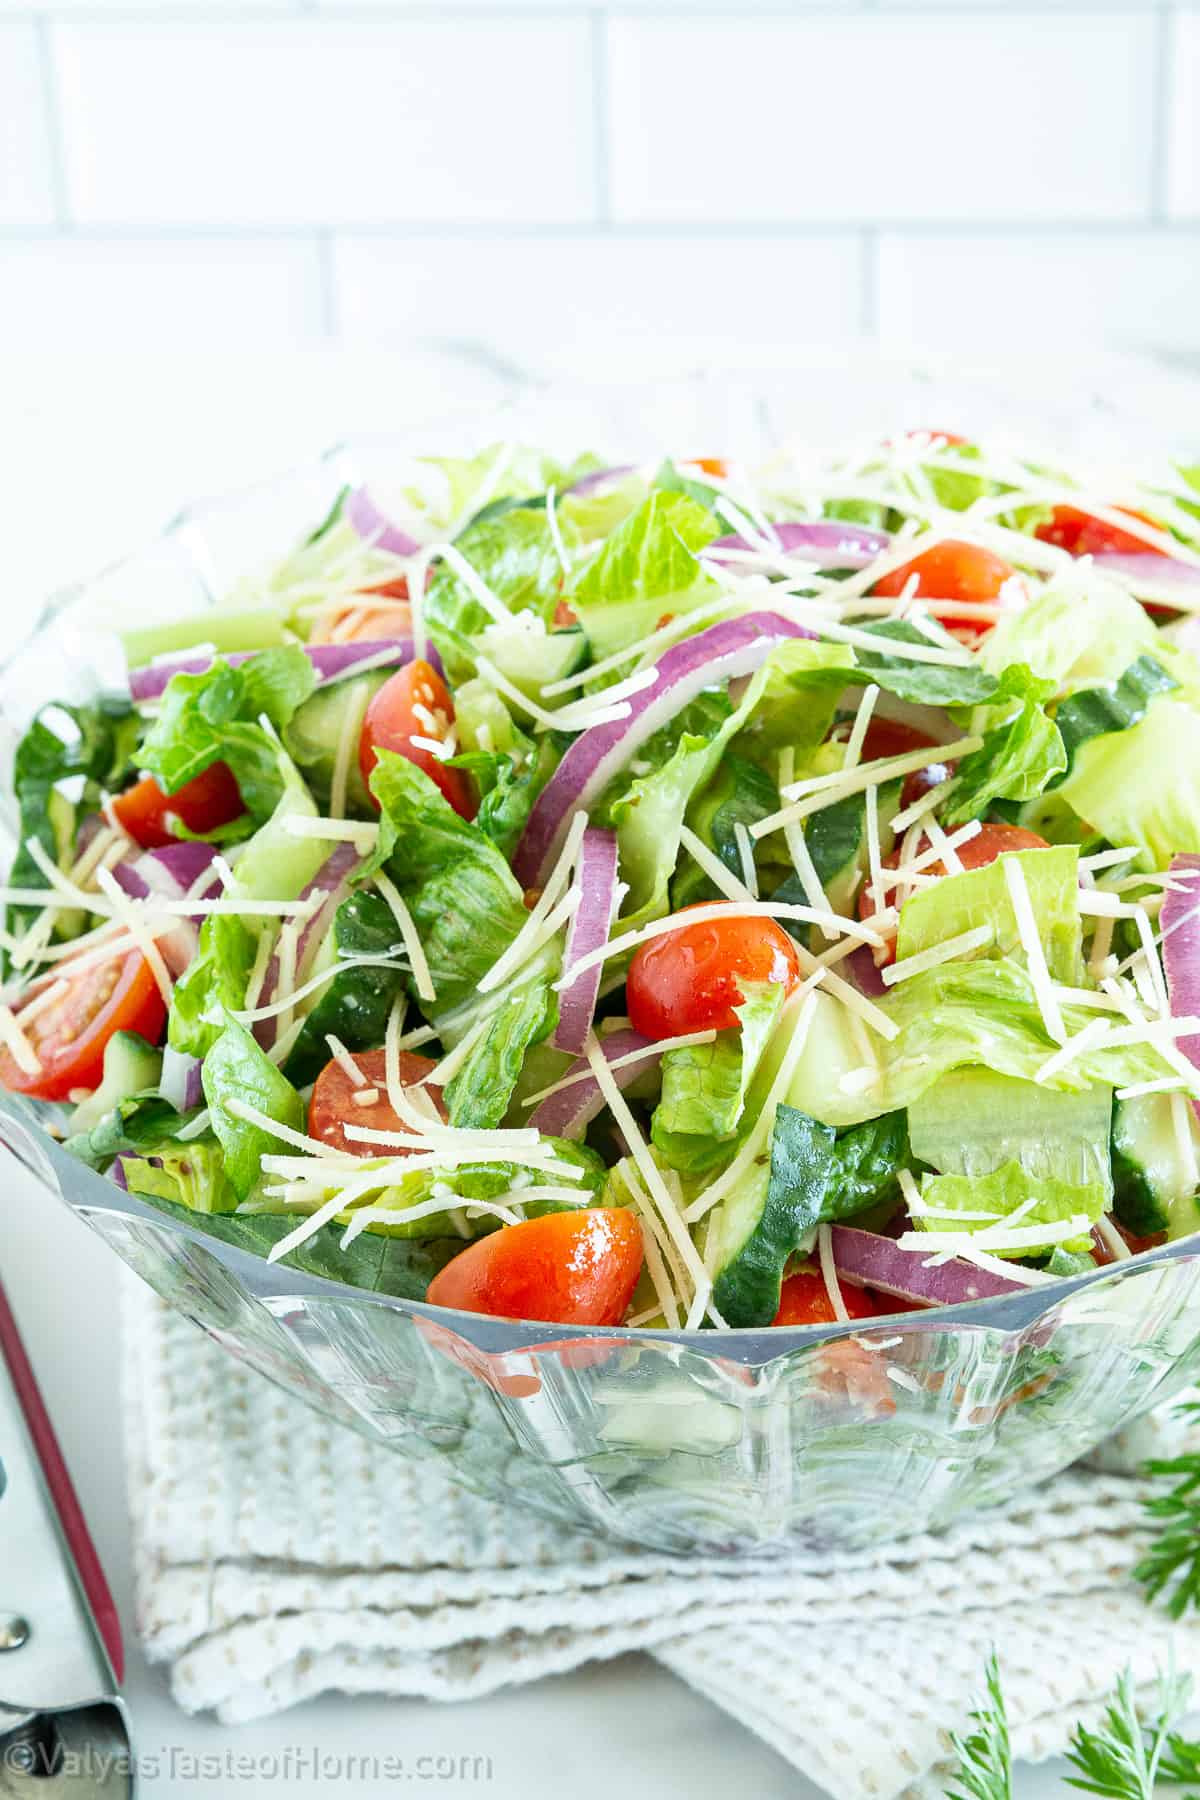 https://www.valyastasteofhome.com/wp-content/uploads/2015/12/Quick-and-Easy-Romaine-Salad-with-an-Olive-Garden-Dressing-2.jpg